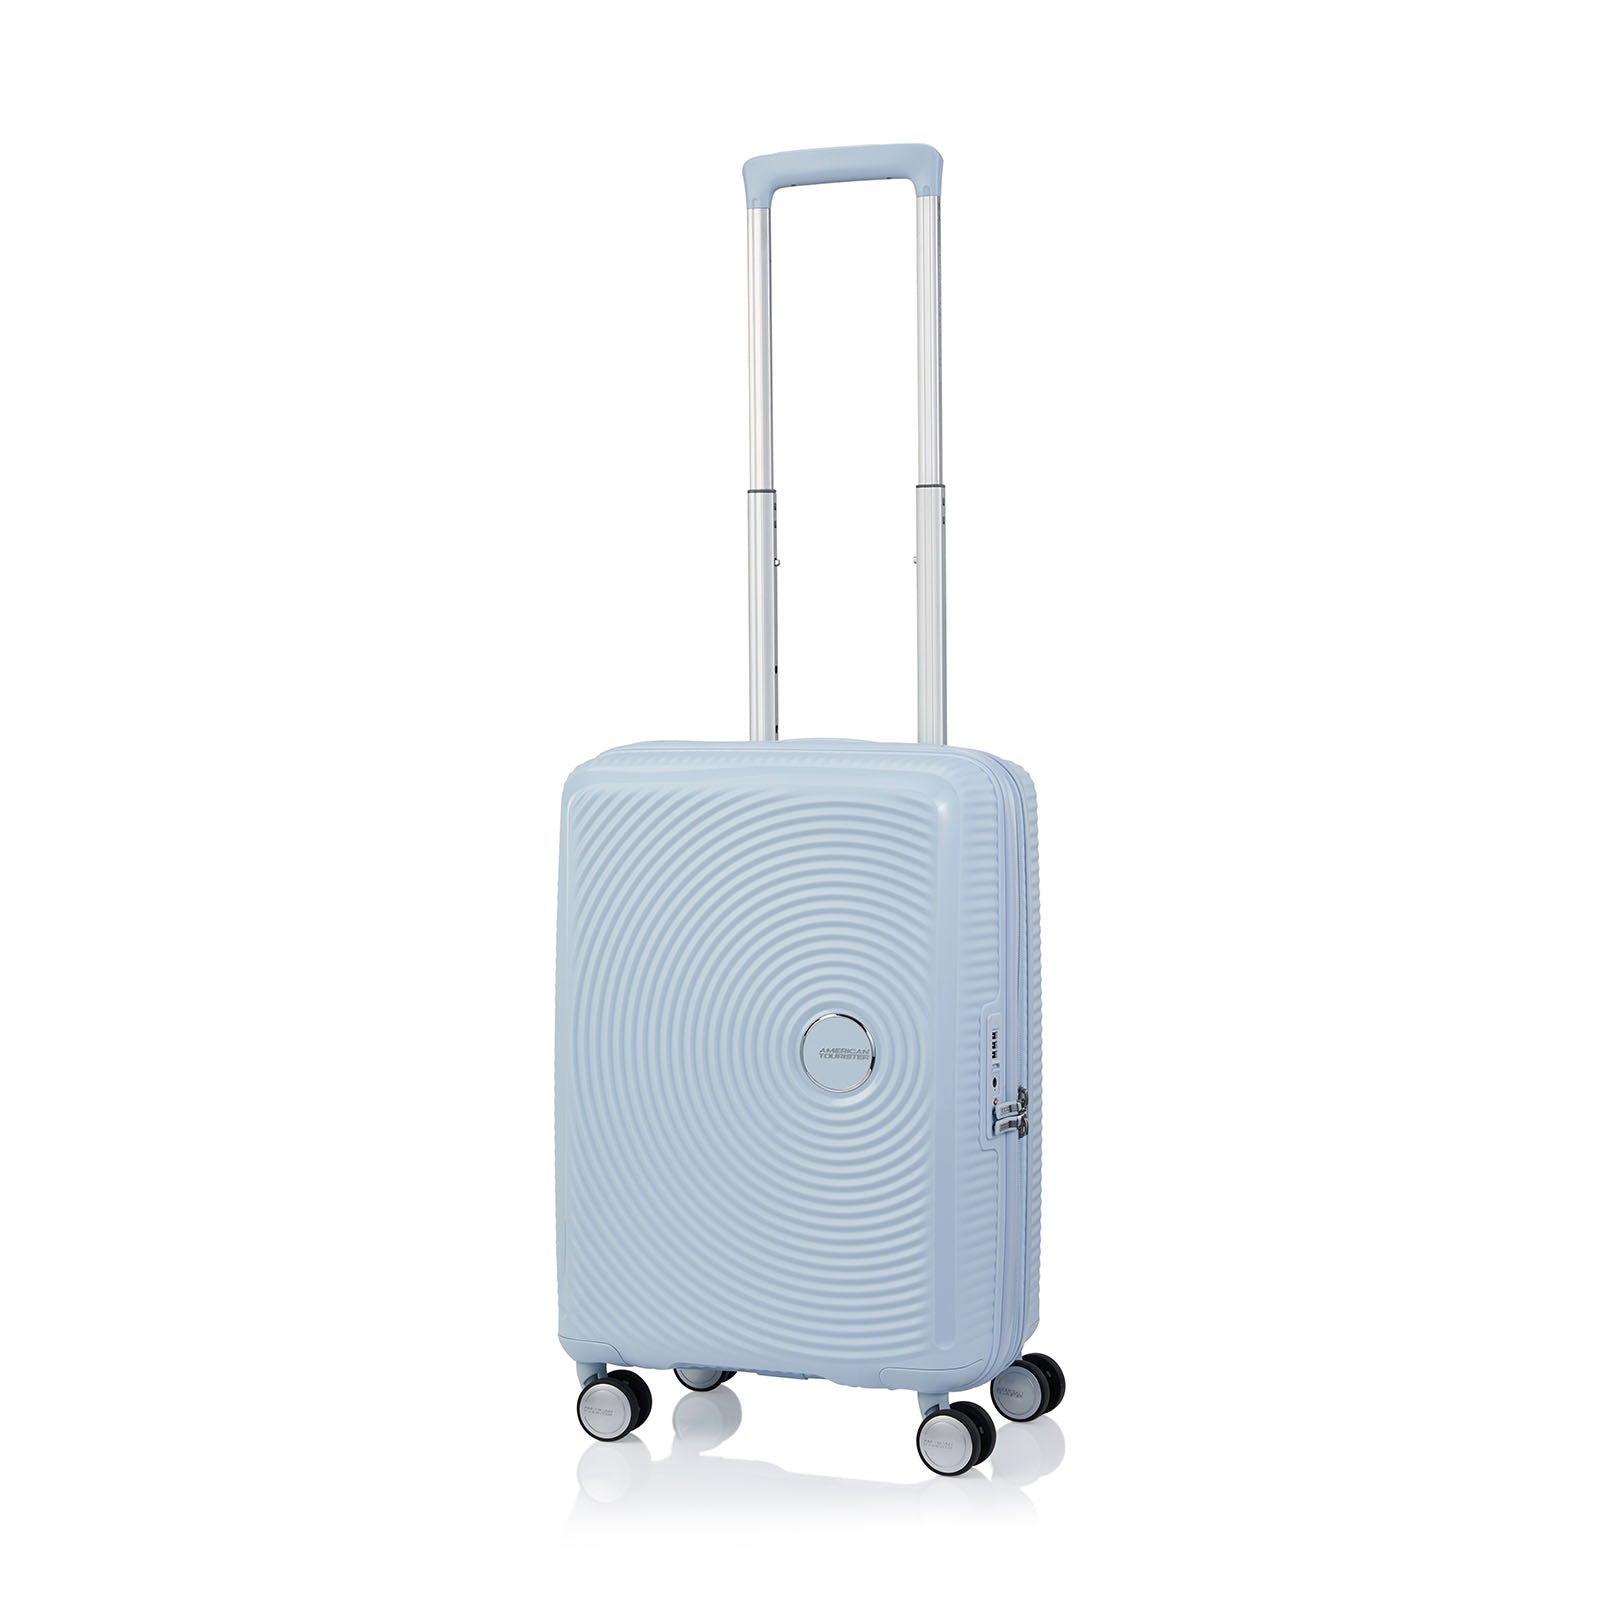 American-Tourister-Curio-2-55cm-Carry-On-Suitcase-Powder-Blue-Front-Angle